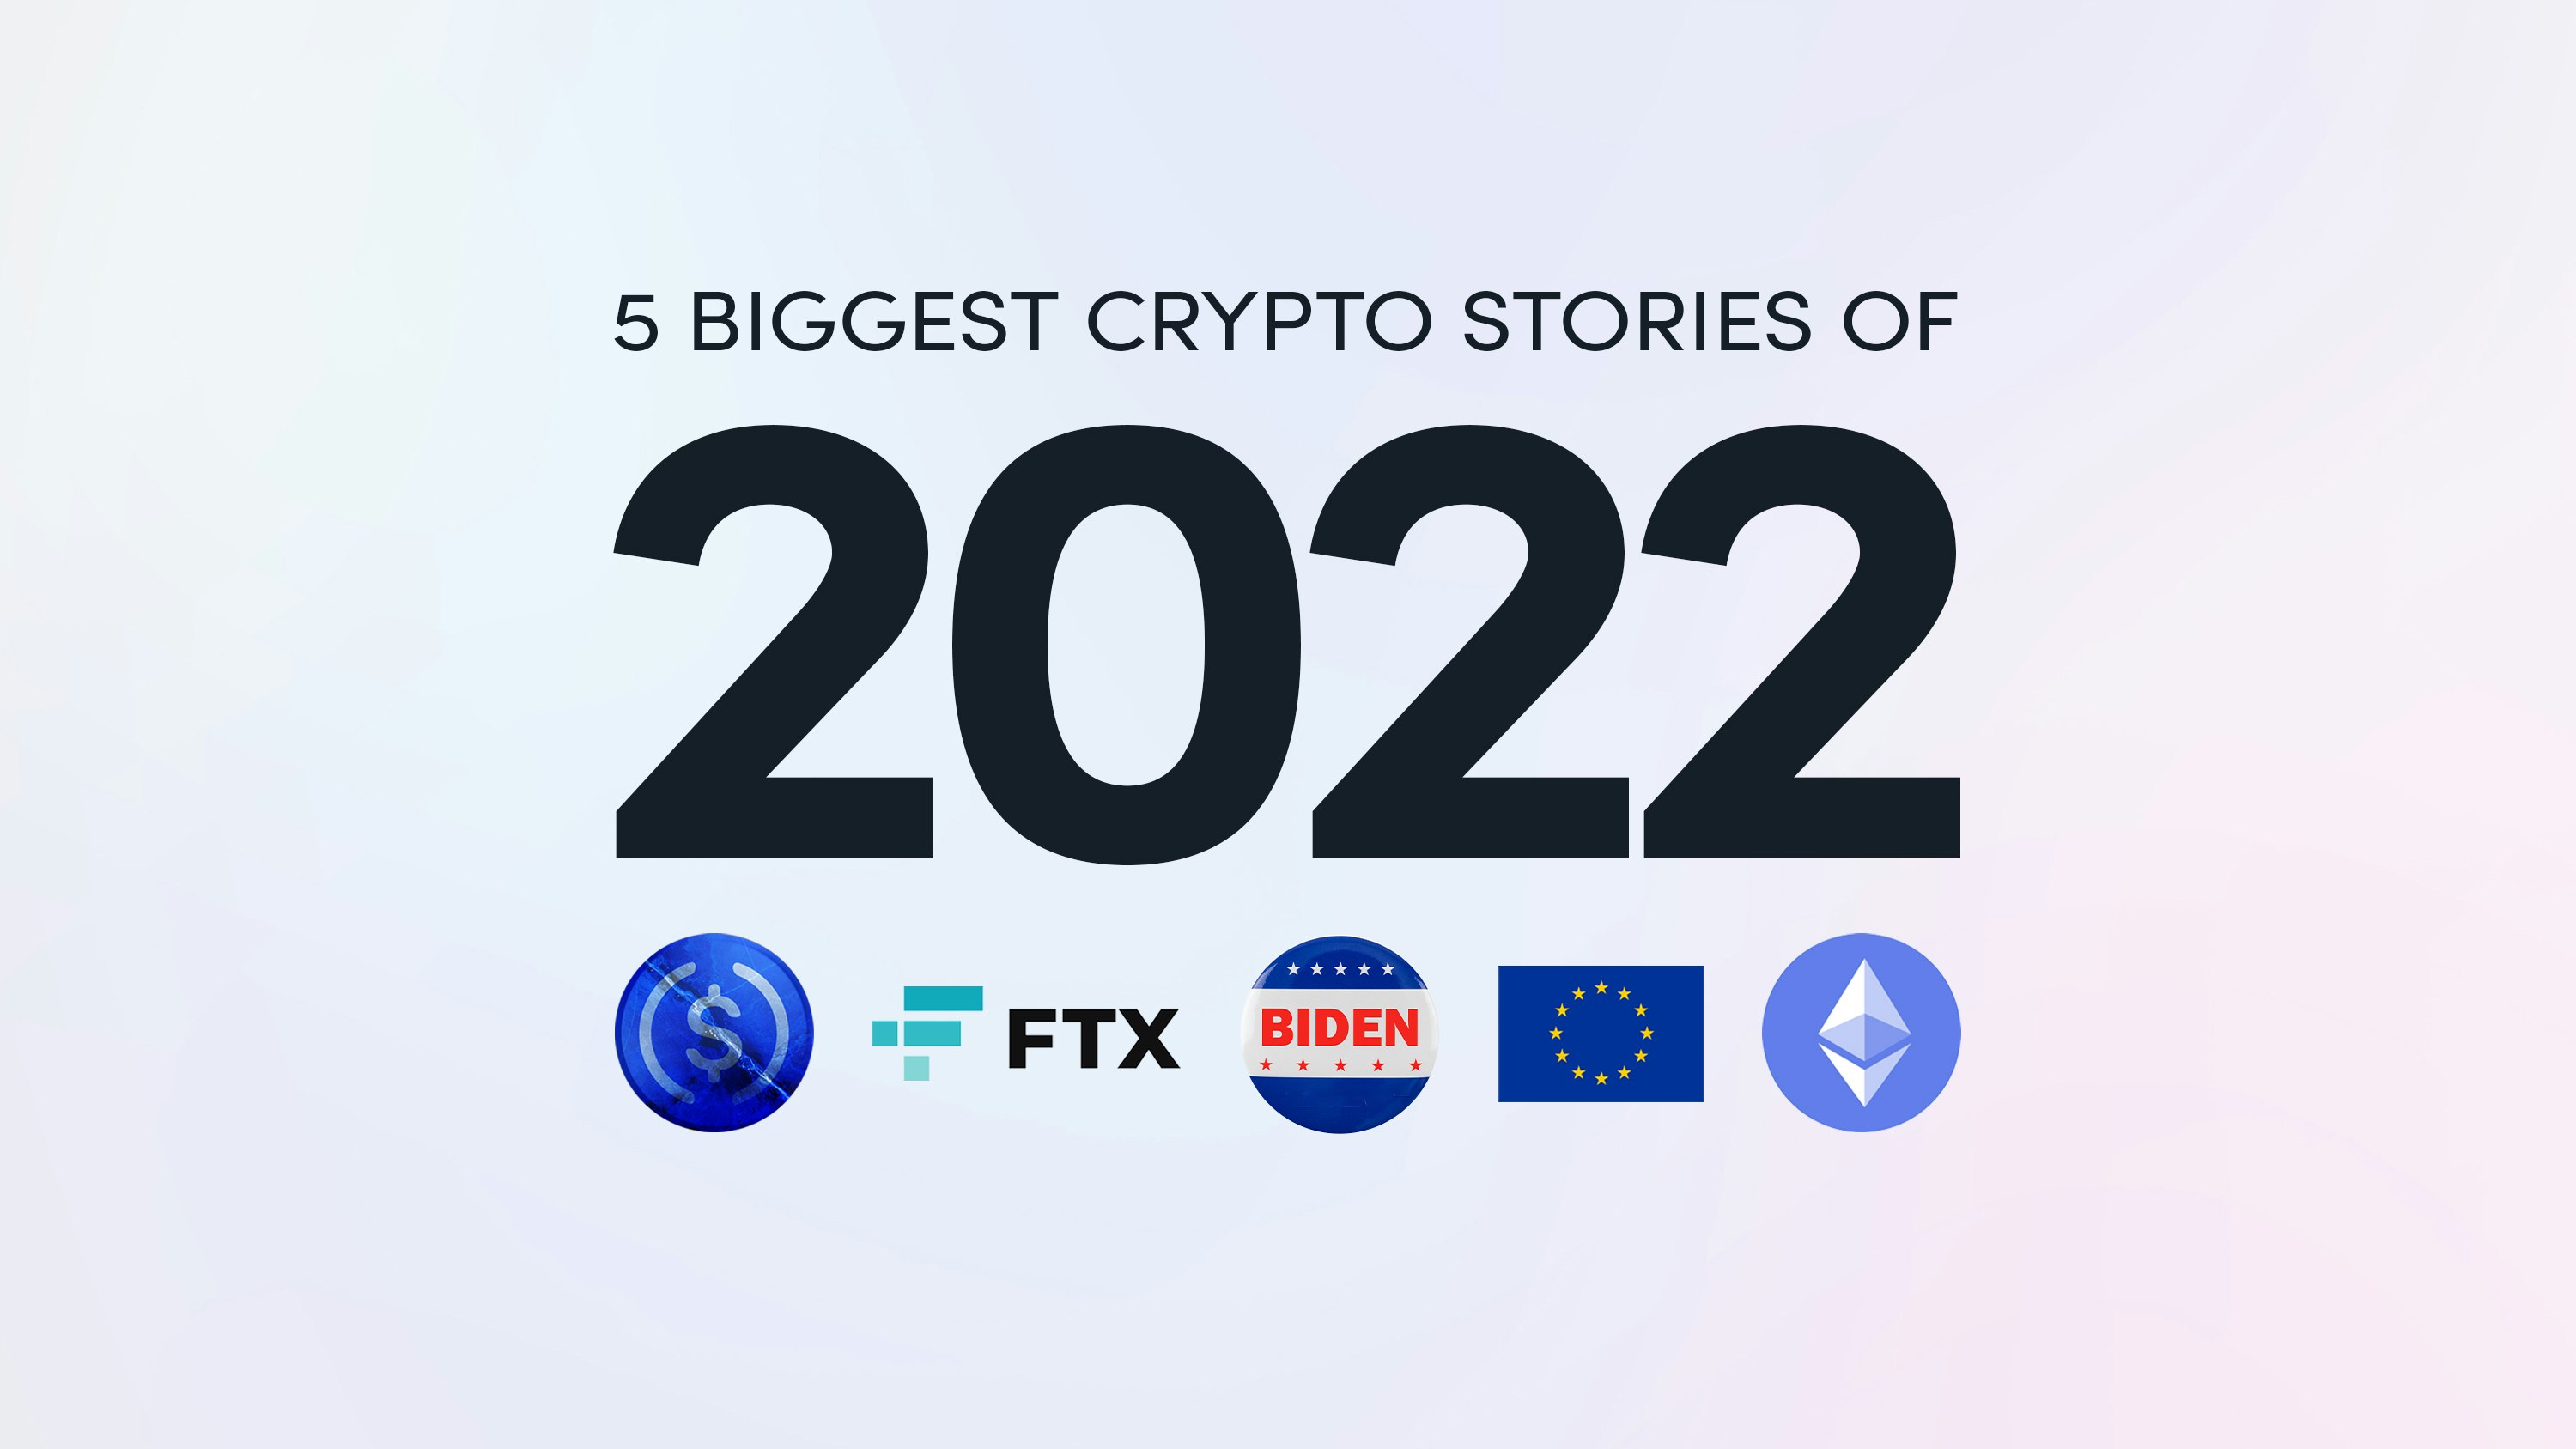 the 5 biggest crypto stories of 2022 with icons for Terra UST stablecoin FTX crypto exchange Biden for President campaign pin European Union flag and Ethereum below